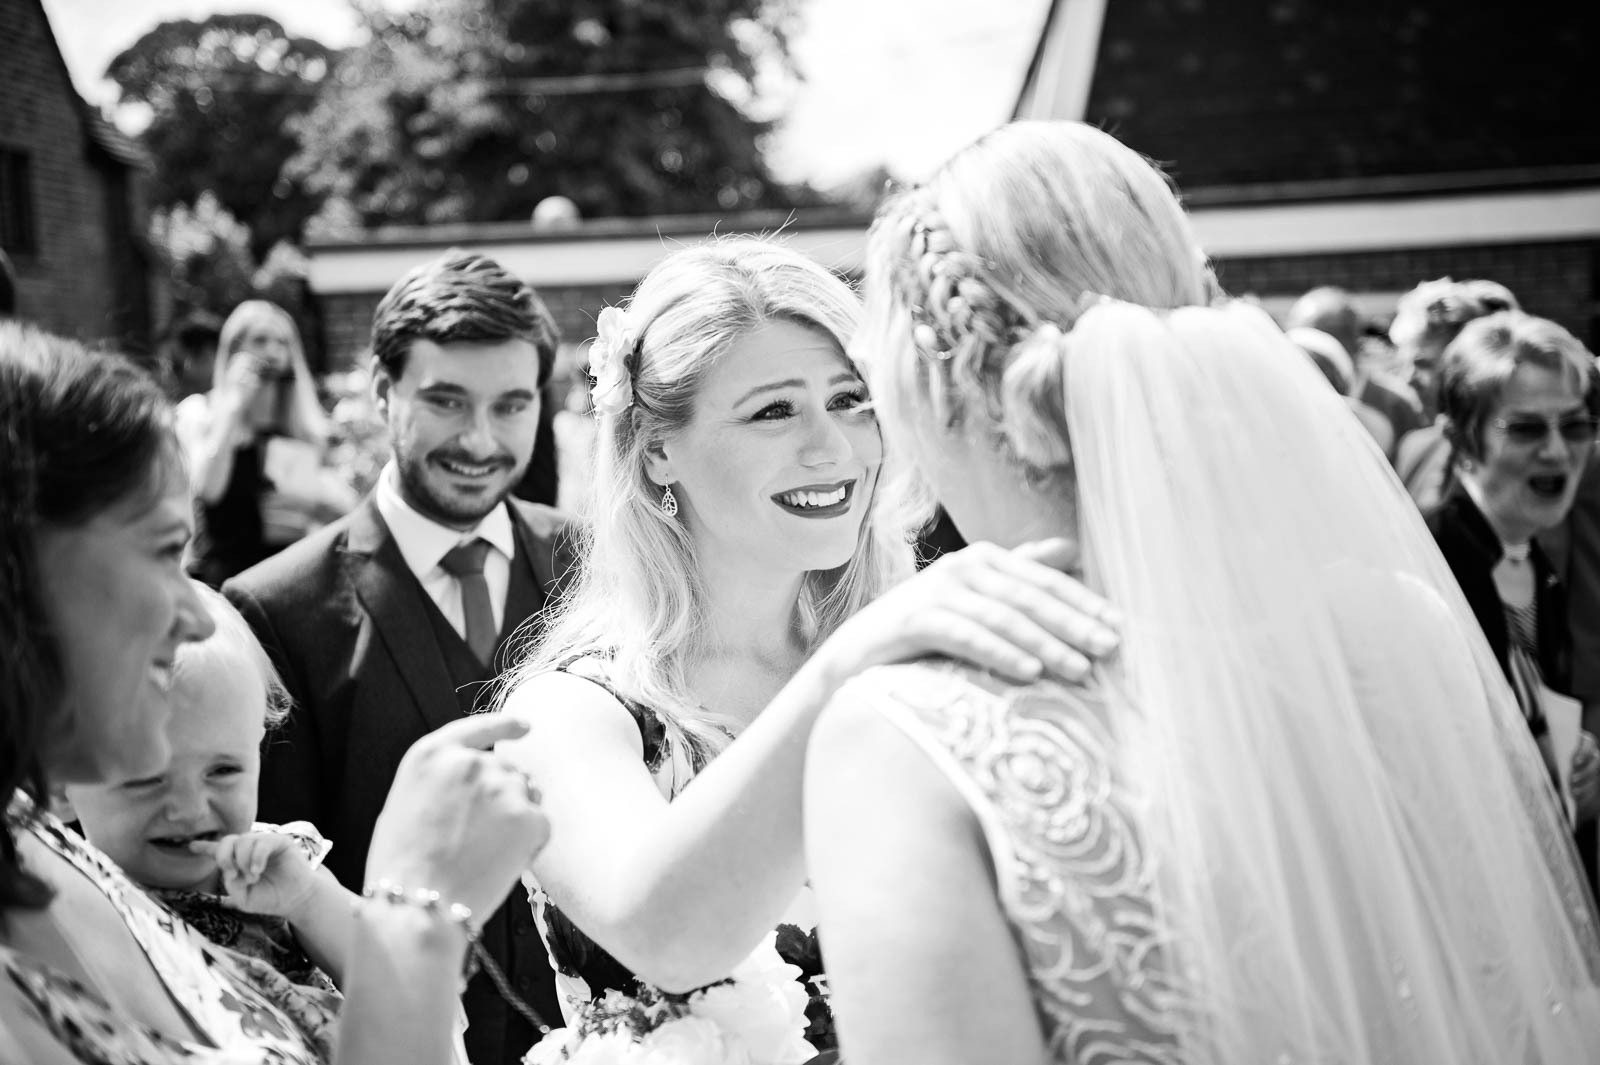 A b&w image of a friend greeting the bride.